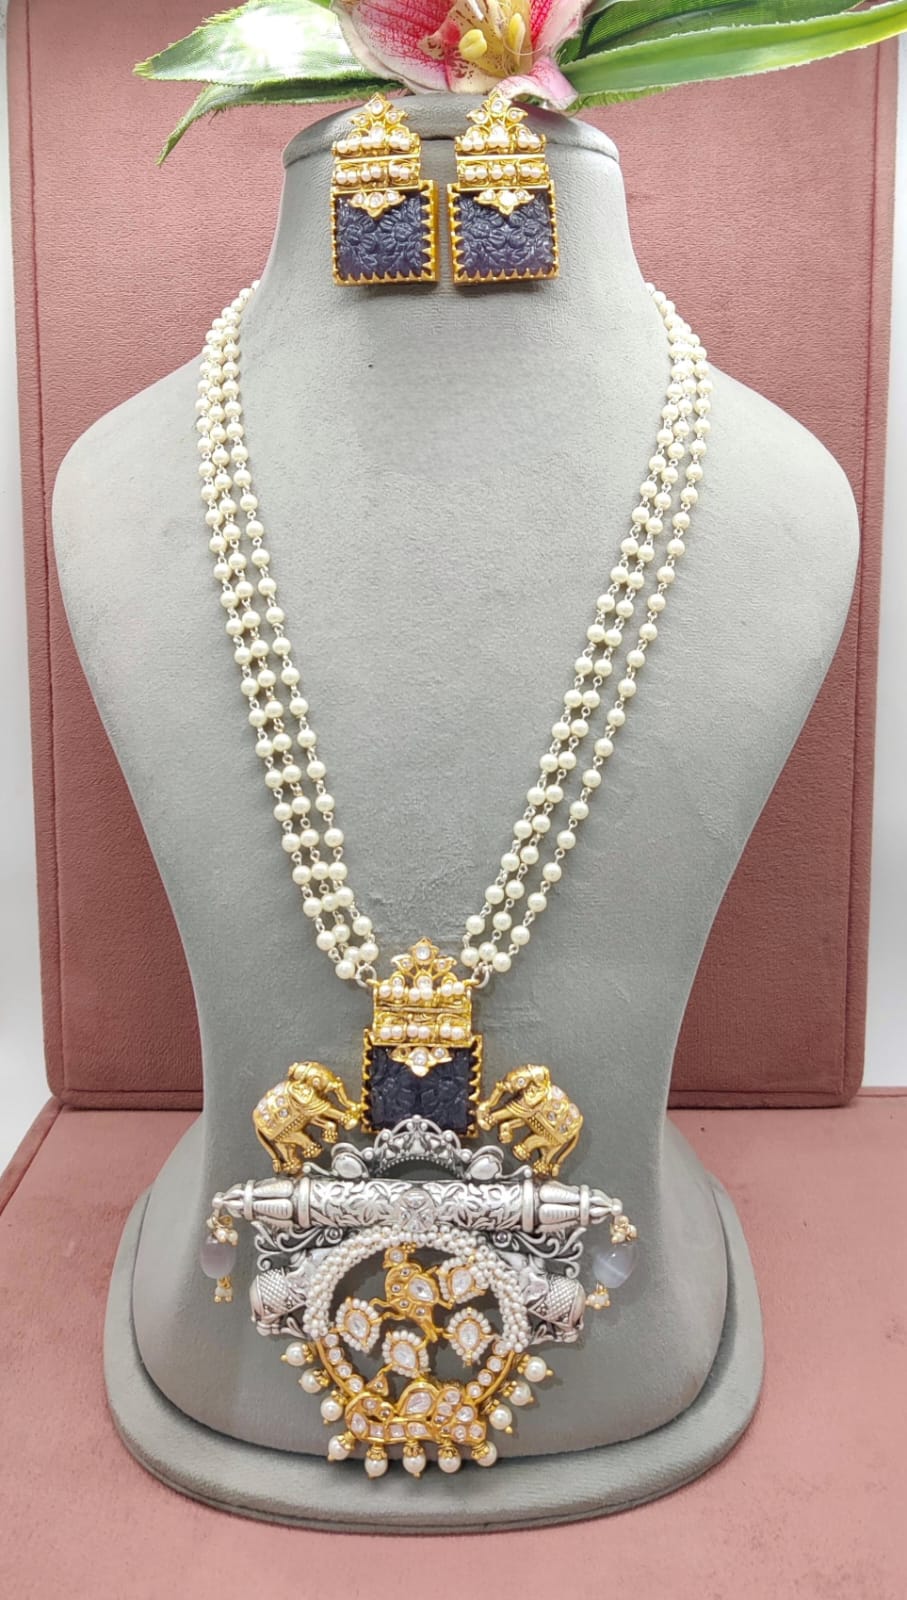 Harmony in Pearls: Multi-String Haram Necklace with Silver and Gold Polished Pendant Earrings